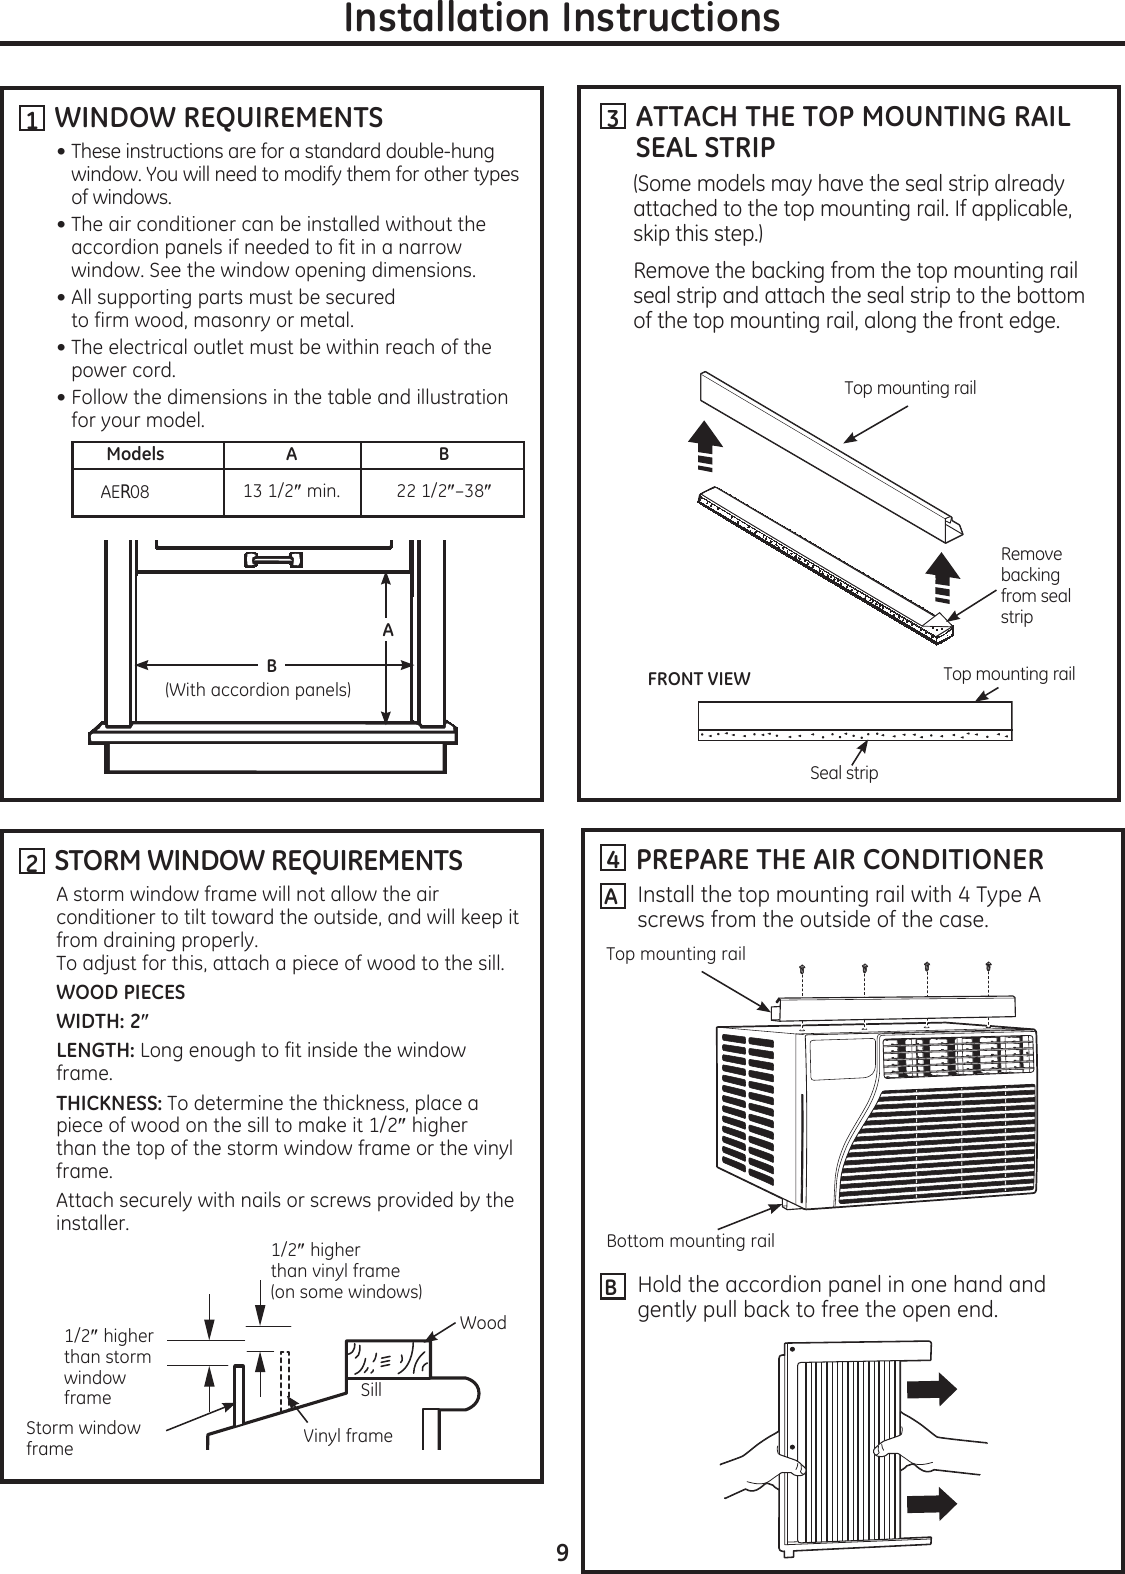   WINDOW REQUIREMENTSThese instructions are for a standard double-hung window. You will need to modify them for other types of windows.The air conditioner can be installed without the accordion panels if needed to fit in a narrow window. See the window opening dimensions.All supporting parts must be secured  to firm wood, masonry or metal.The electrical outlet must be within reach of the power cord.Follow the dimensions in the table and illustration for your model.      Models  A  B 13 1/2smin. 22 1/2s–38sAER08  STORM WINDOW REQUIREMENTSA storm window frame will not allow the air conditioner to tilt toward the outside, and will keep it from draining properly.  To adjust for this, attach a piece of wood to the sill.WOOD PIECESWIDTH: 2sLENGTH: Long enough to fit inside the window frame.THICKNESS: To determine the thickness, place a piece of wood on the sill to make it 1/2s higher than the top of the storm window frame or the vinyl frame.Attach securely with nails or screws provided by the installer.Installation Instructions1A(With accordion panels)  PREPARE THE AIR CONDITIONERInstall the top mounting rail with 4 Type A screws from the outside of the case.Hold the accordion panel in one hand and gently pull back to free the open end.4ABTop mounting railBottom mounting railB21/2shigher than storm window frameStorm window frameWoodSill1/2shigher than vinyl frame  (on some windows)Vinyl frame  ATTACH THE TOP MOUNTING RAIL SEAL STRIP(Some models may have the seal strip already attached to the top mounting rail. If applicable, skip this step.)Remove the backing from the top mounting rail seal strip and attach the seal strip to the bottom of the top mounting rail, along the front edge. 3Top mounting railRemove backing  from seal  stripTop mounting railSeal stripFRONT VIEW9